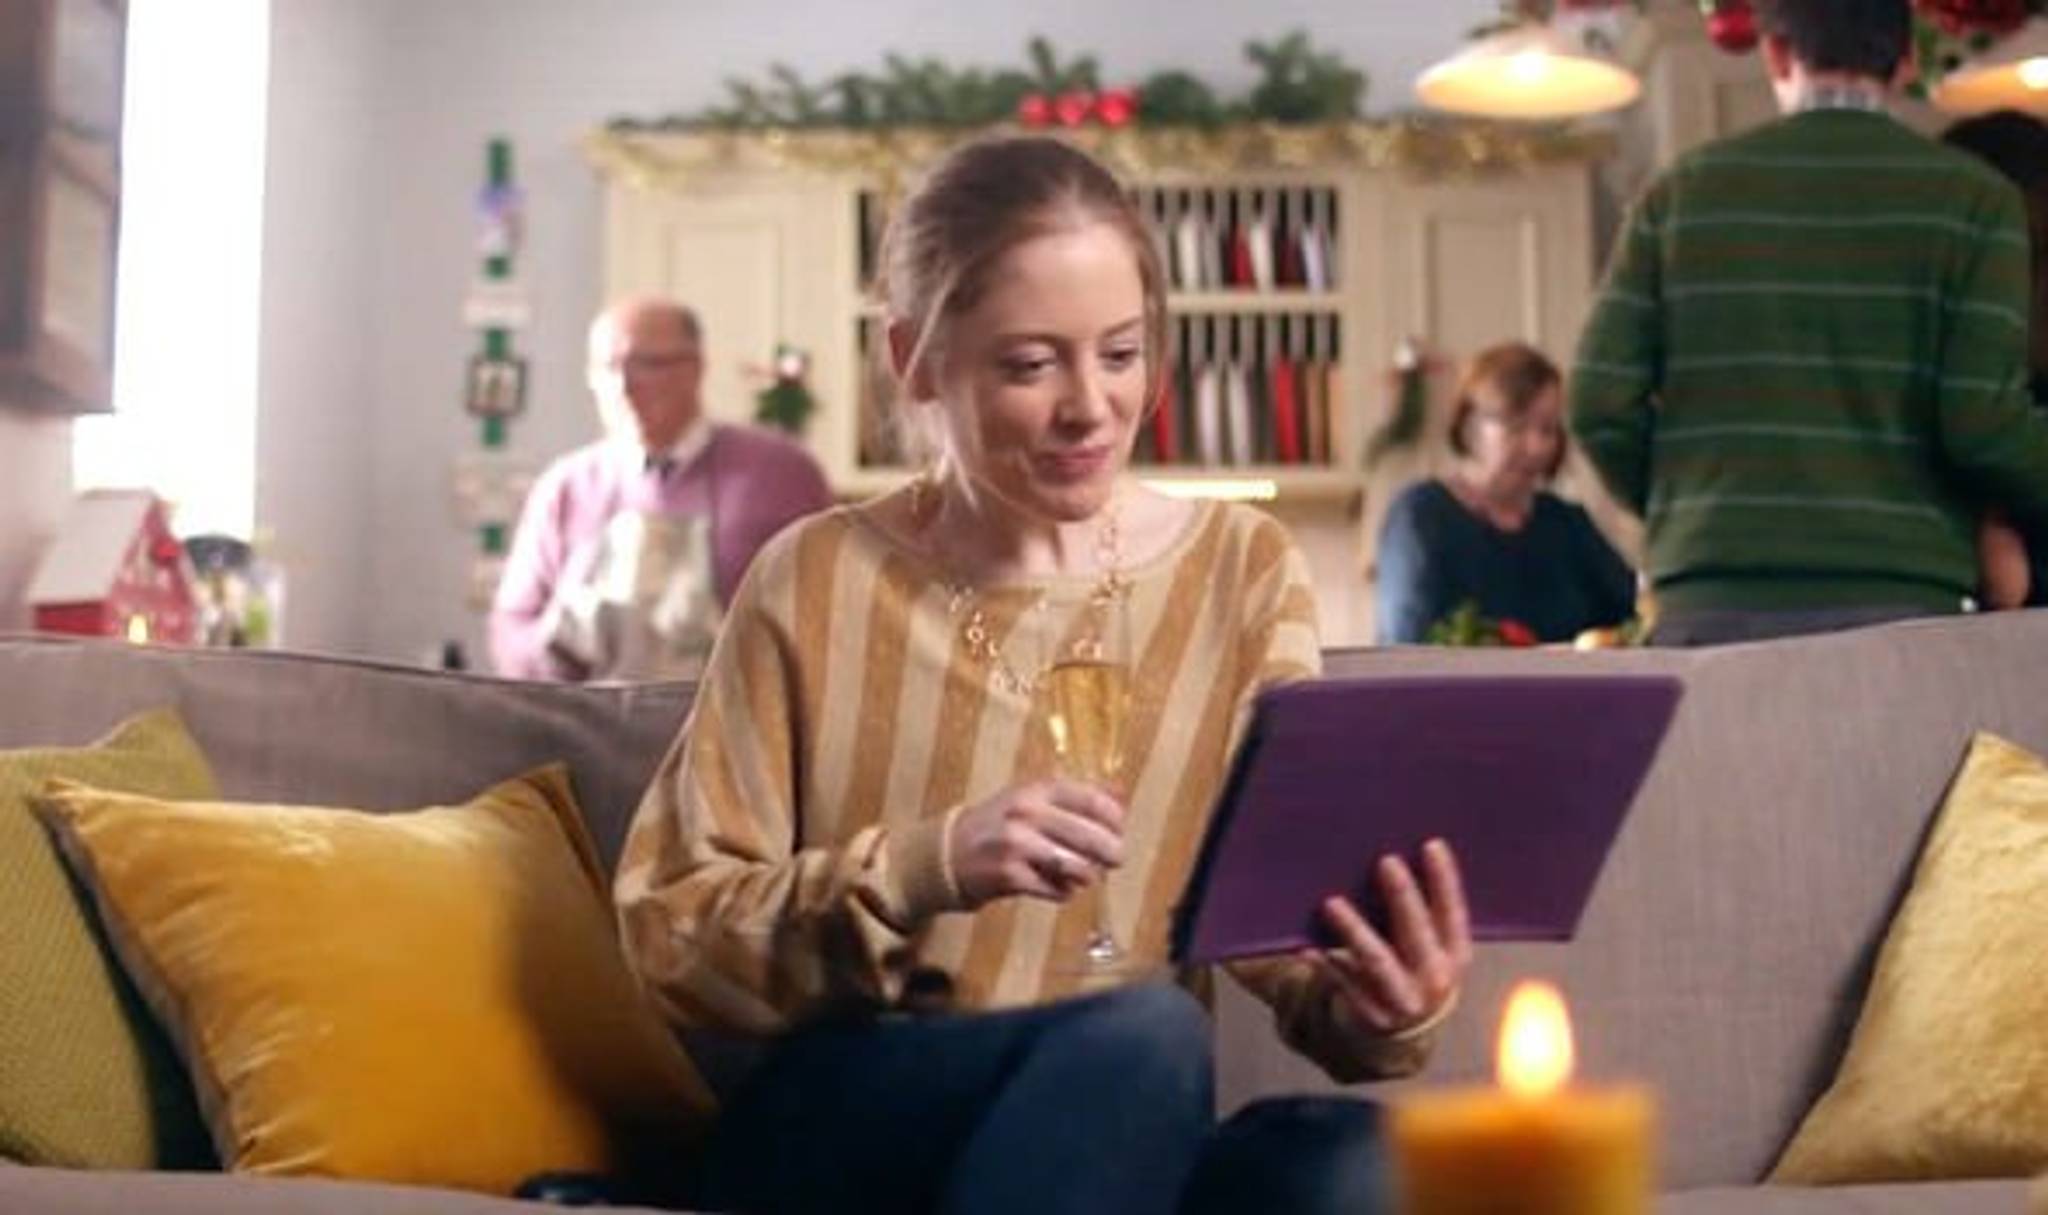 Lidl’s relatable Christmas ad captures modern rituals